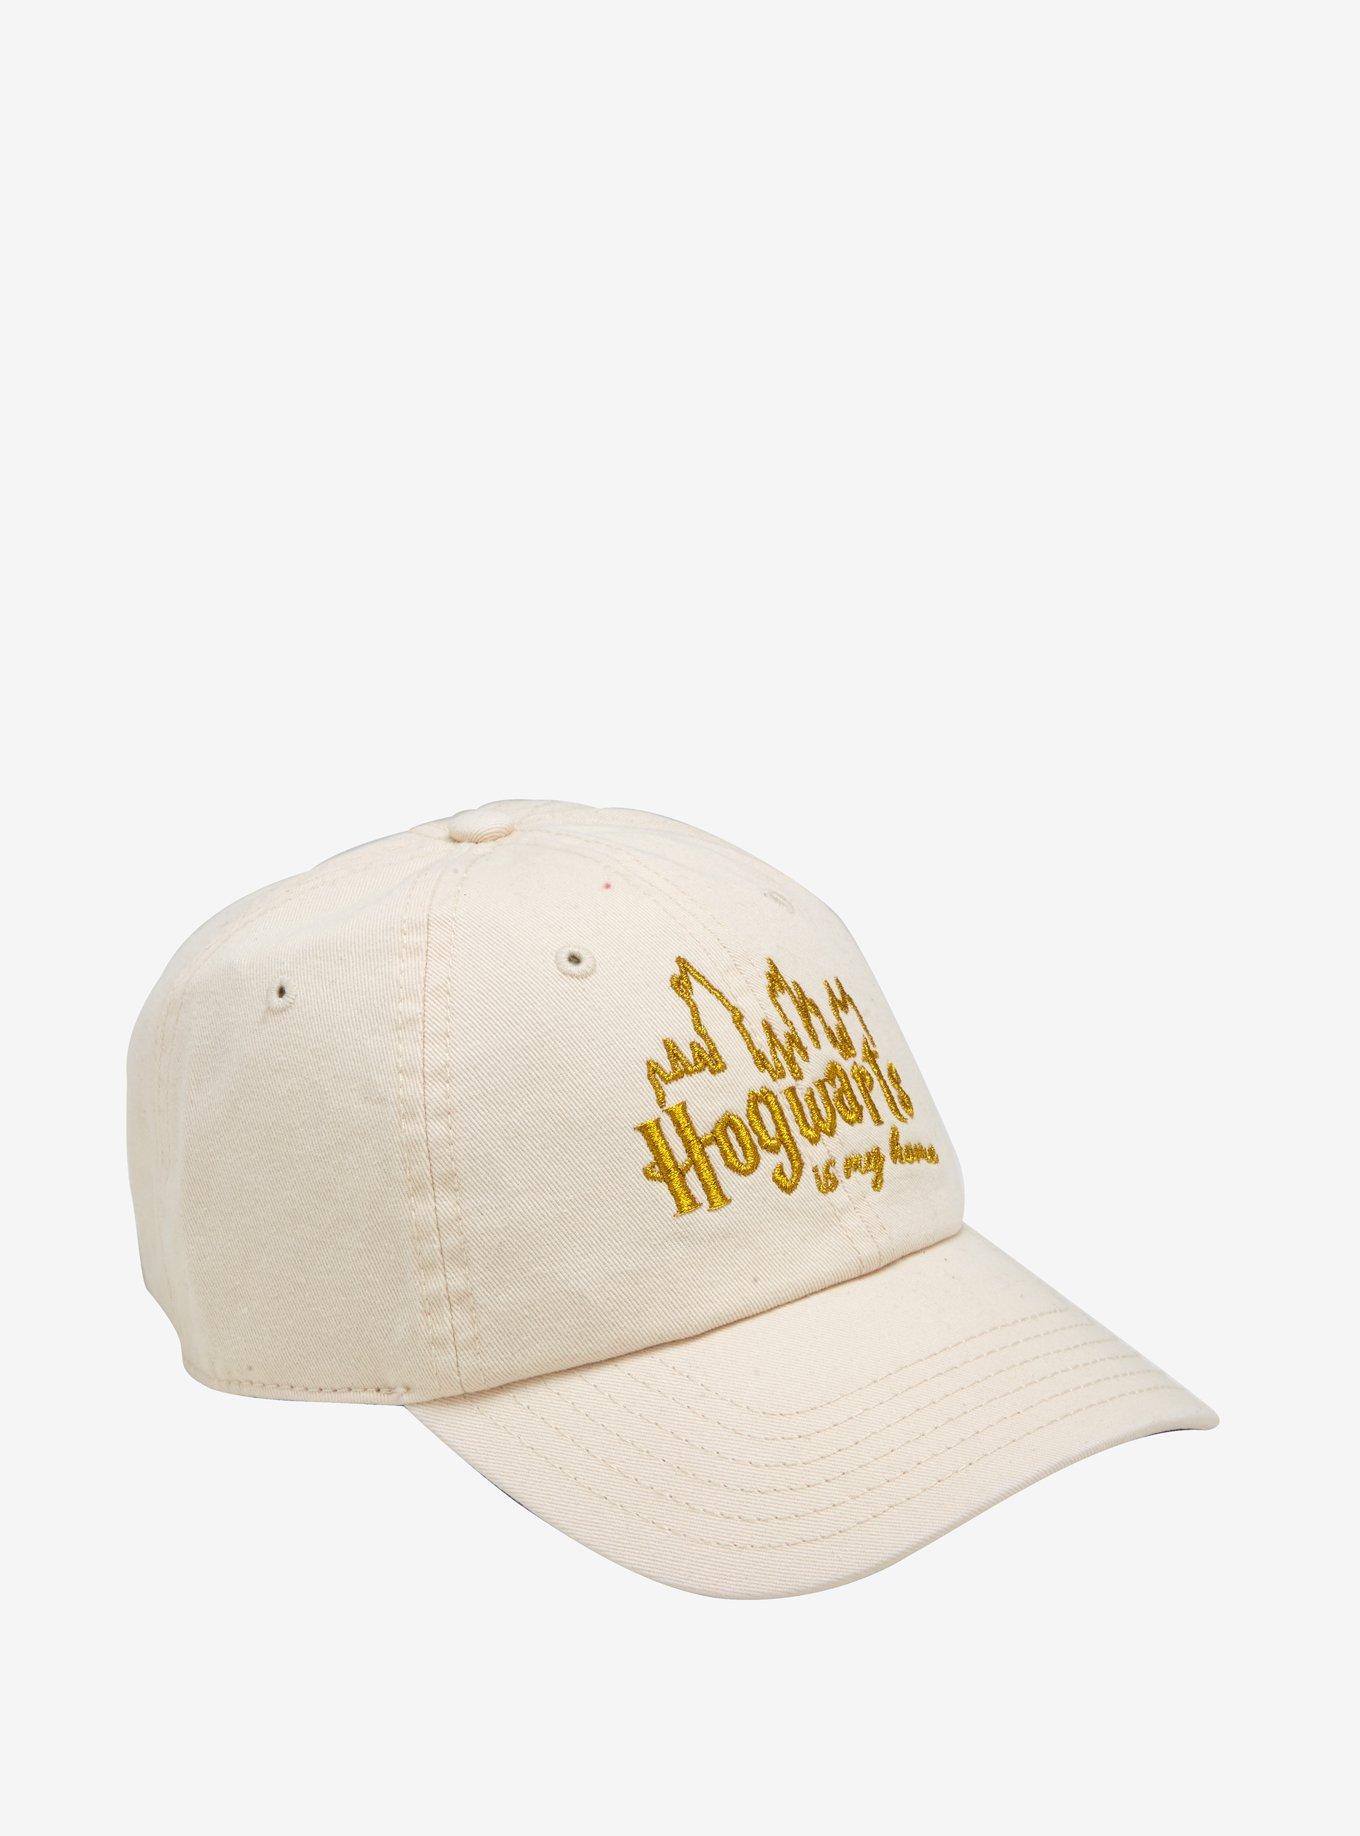 Harry Potter Hogwarts Is My Home Dad Cap | Hot Topic